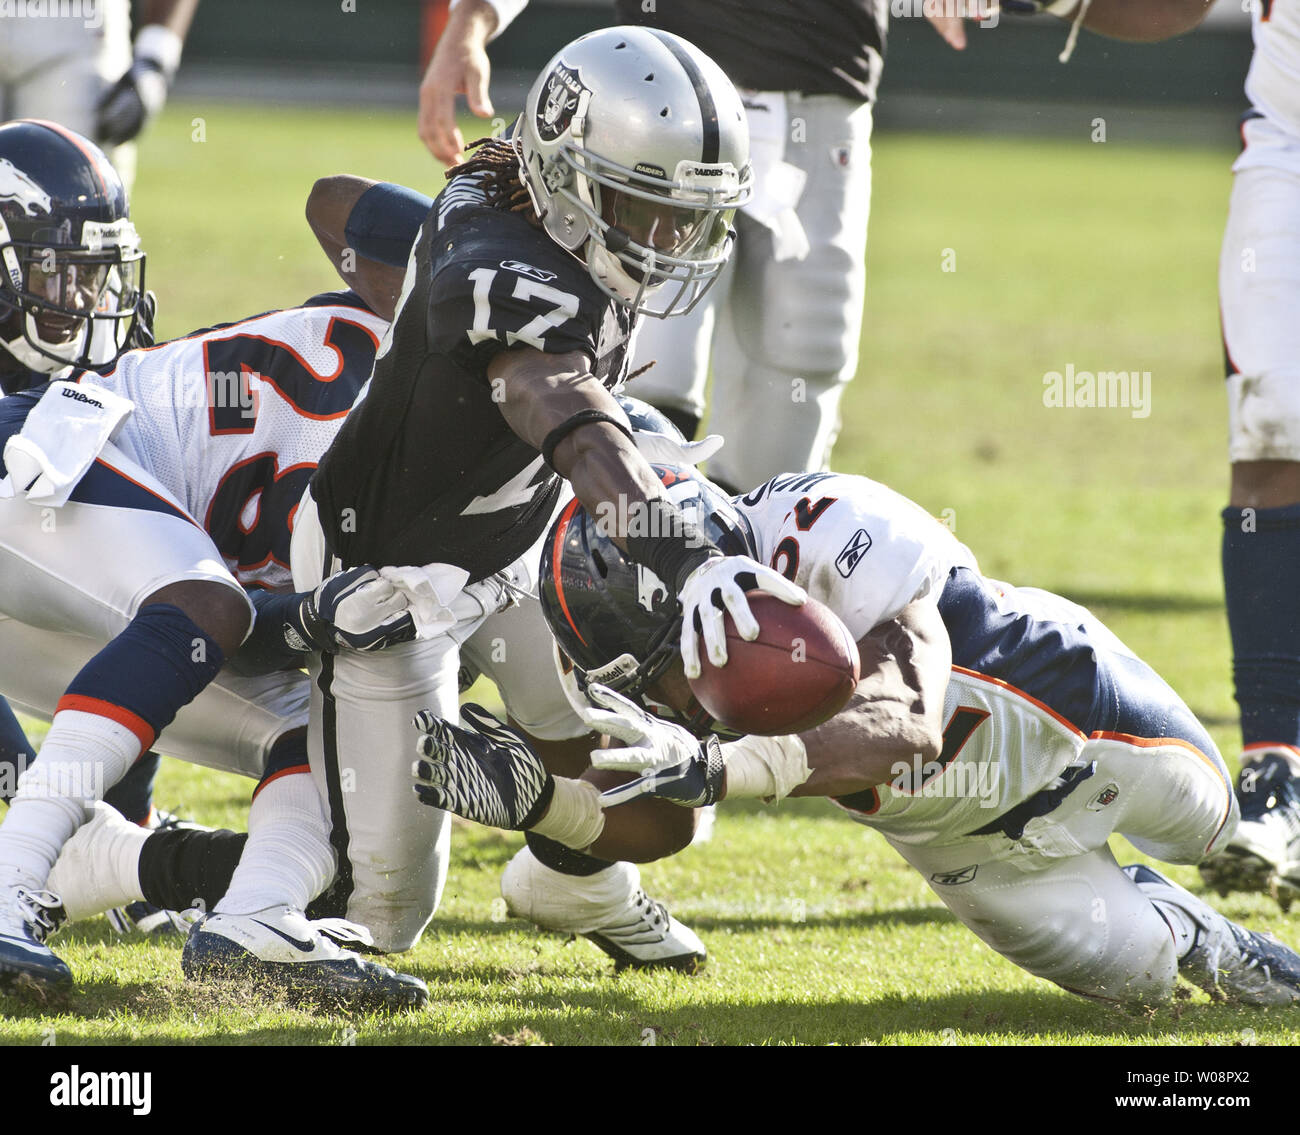 Oakland Raiders WR Denarius Moore (17) extends the ball over the first down line against the Denver Broncos at the O.co Coliseum in Oakland, California on November 6, 2011. The Broncos beat the Raiders 38-24.    UPI/Terry Schmitt Stock Photo